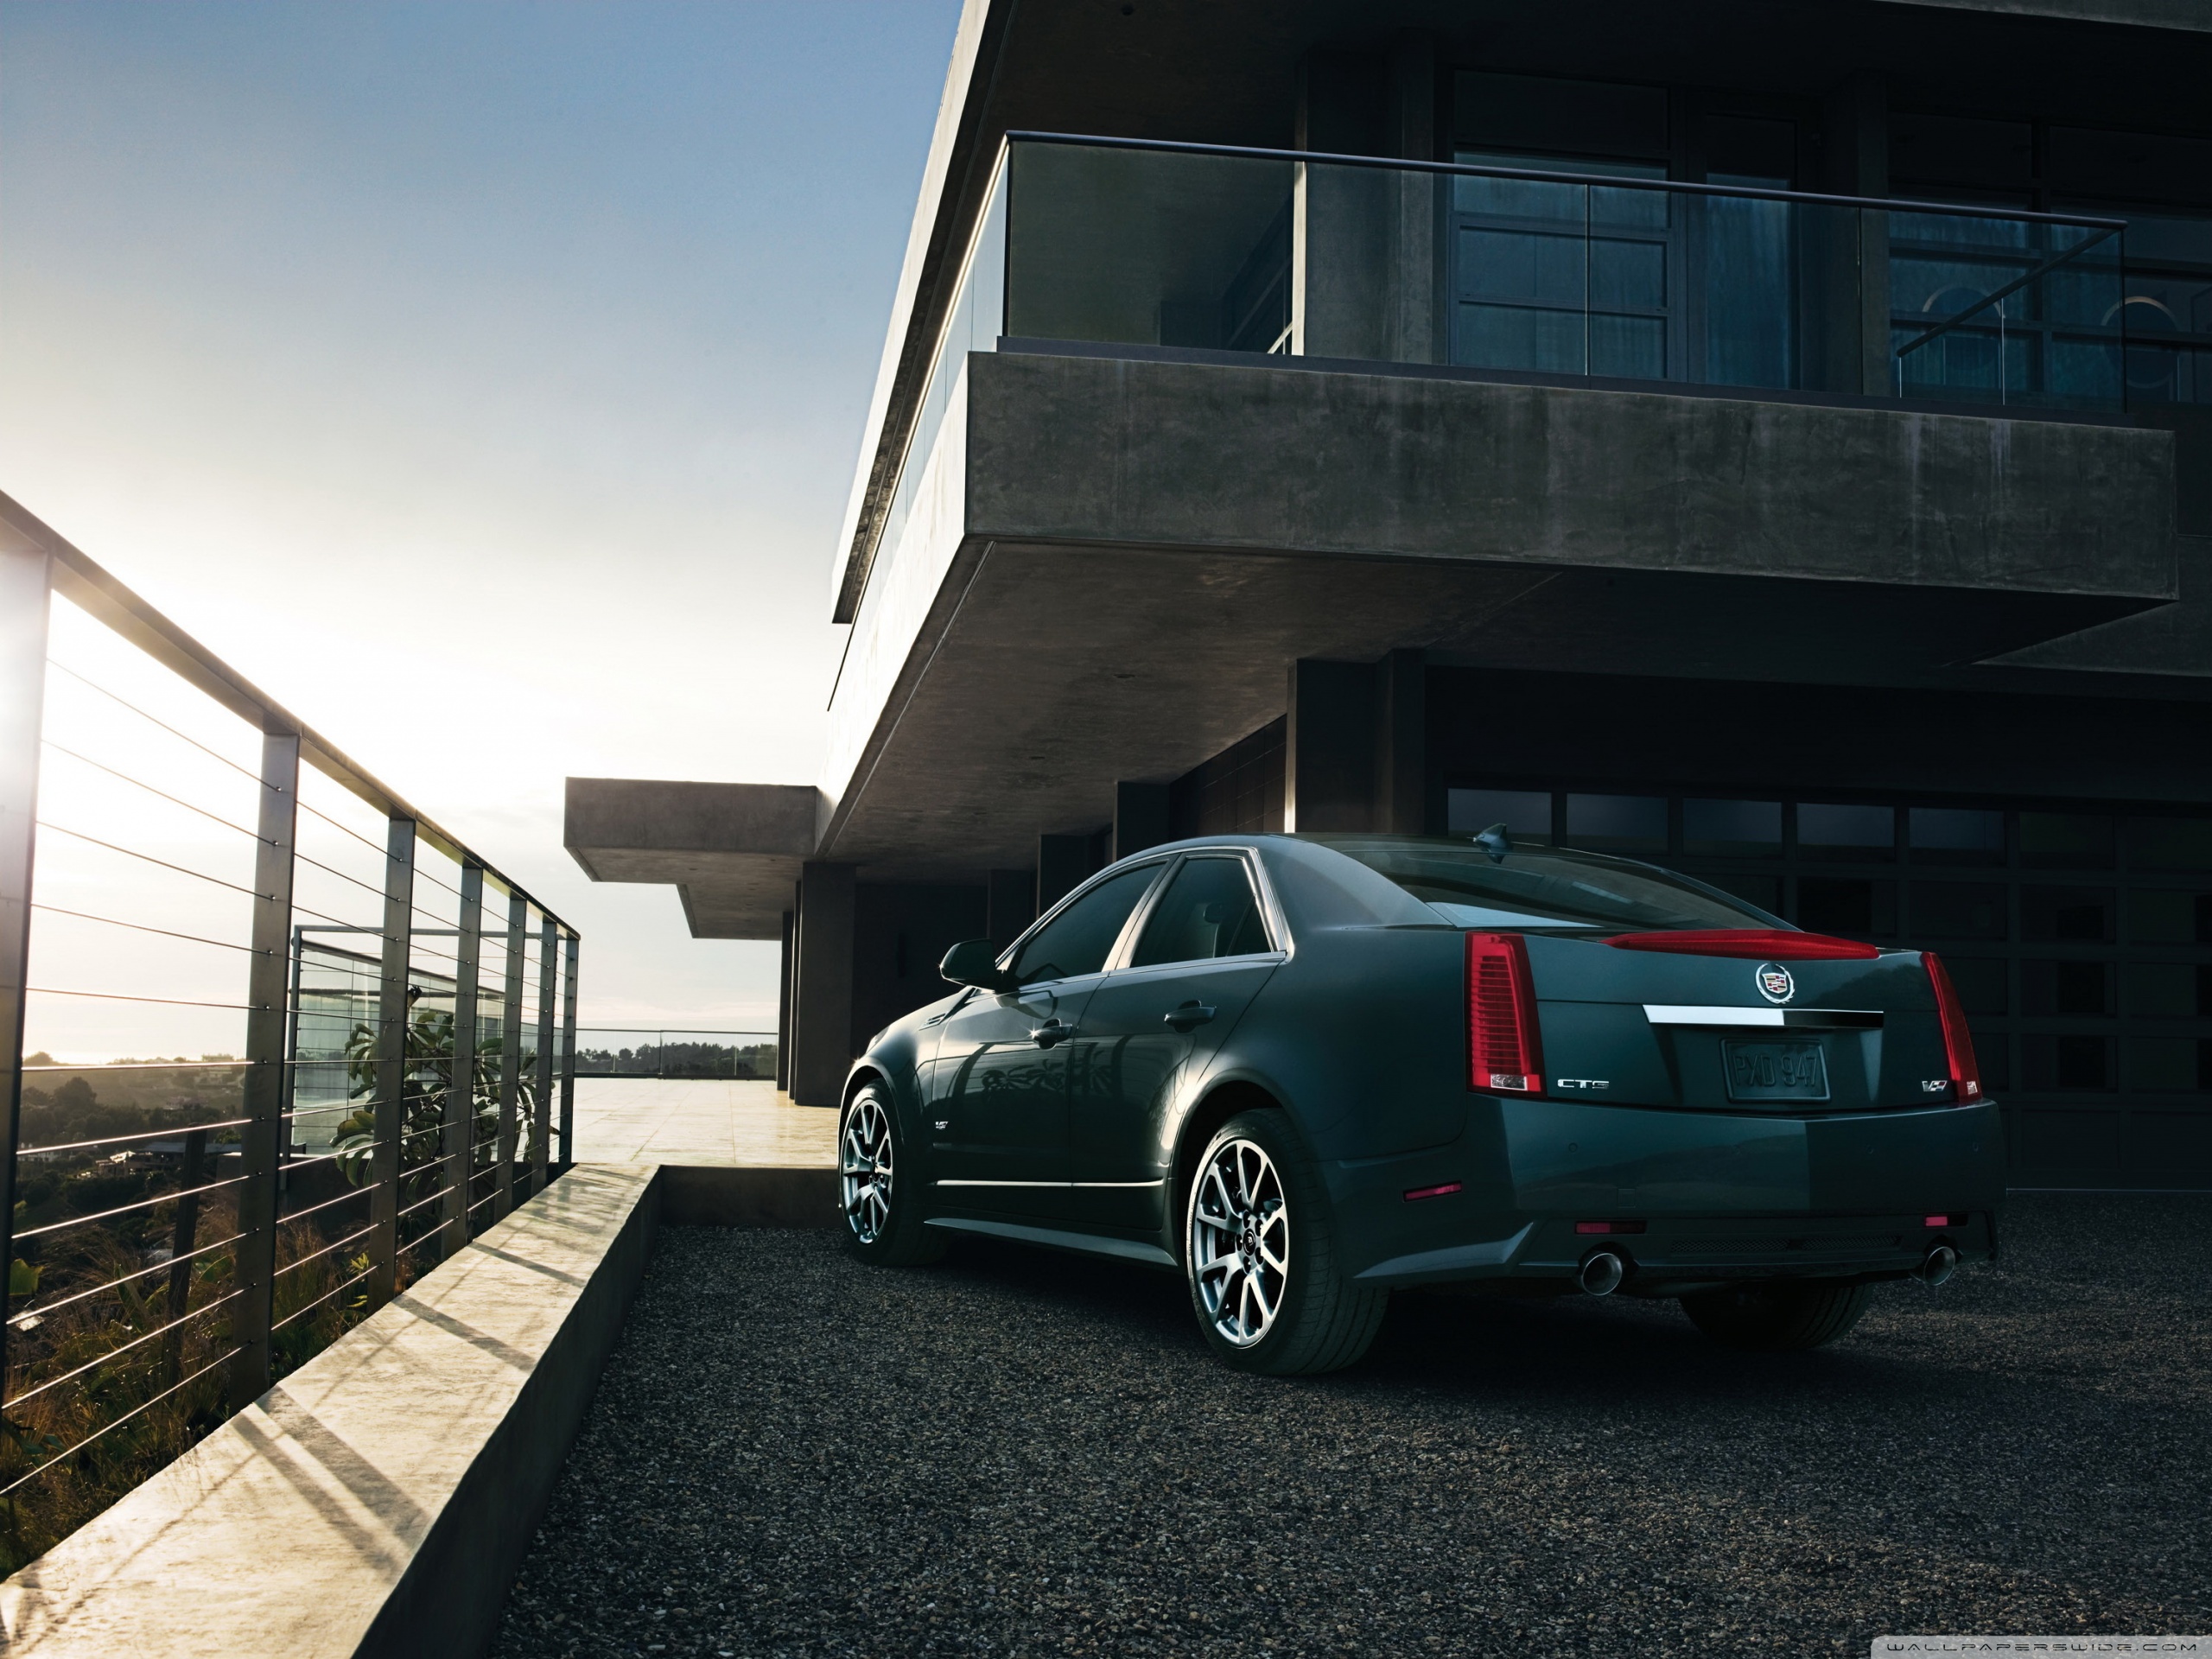 Cadillac Cts Ultra Hd Desktop Background Wallpaper For Multi Display Dual Monitor Tablet Smartphone